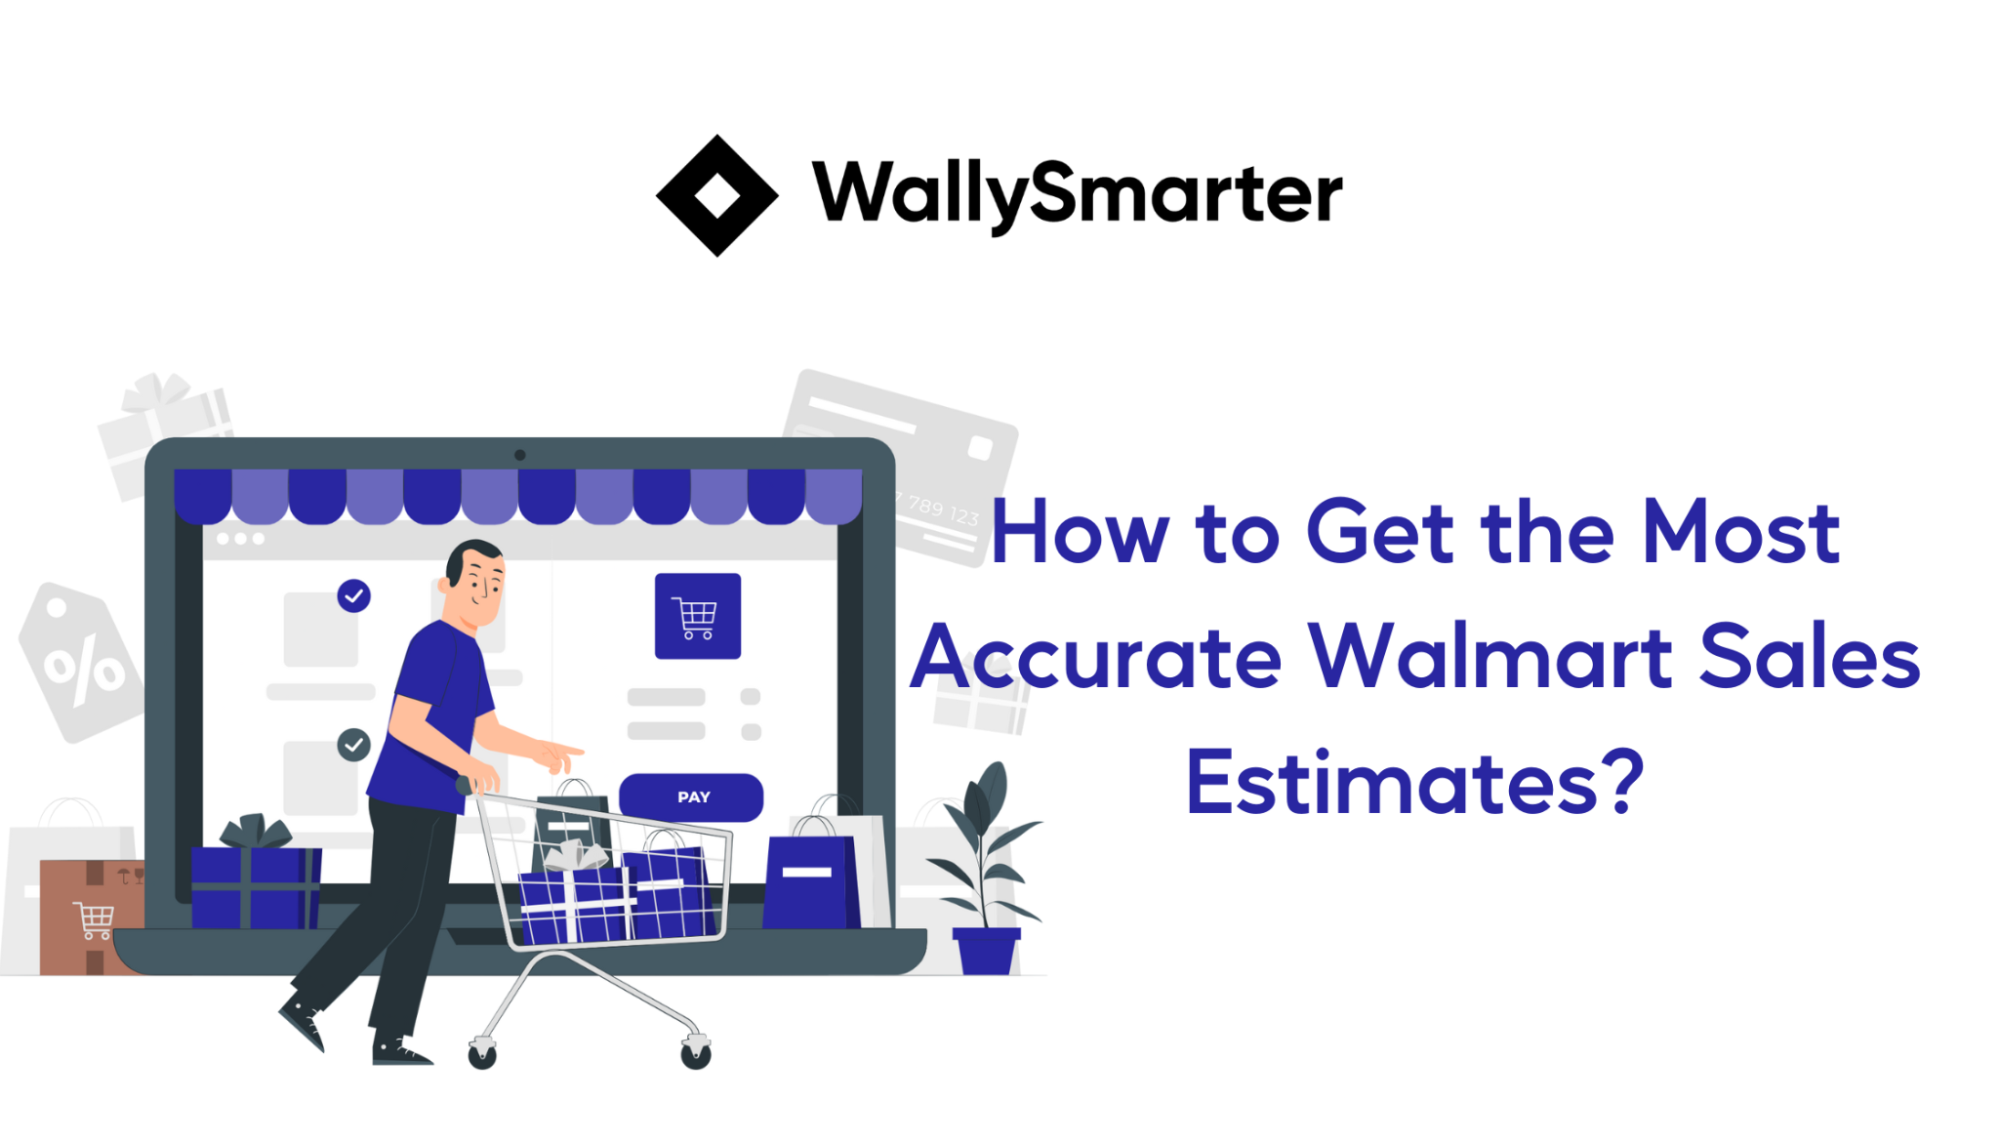 How to Get the Most Accurate Walmart Sales Estimates?